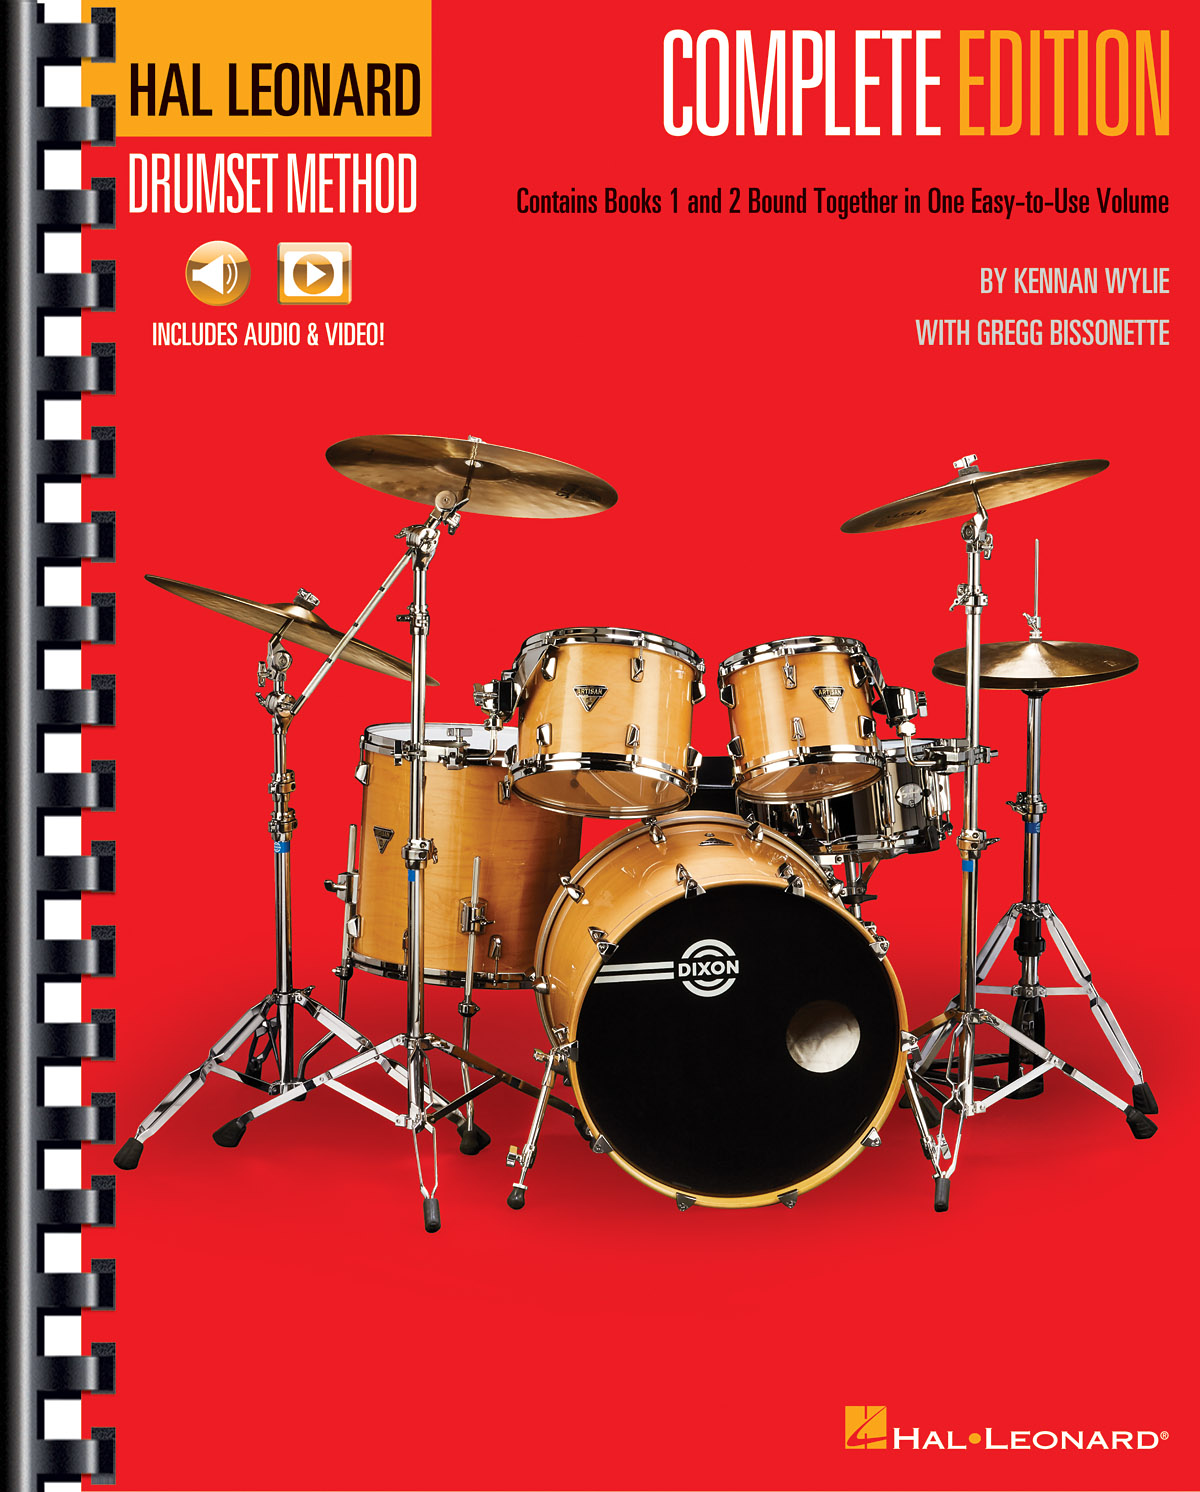 Hal Leonard Drumset Method - Complete Edition - Books 1 and 2 with Video and Audio - noty pro bicí soupravu